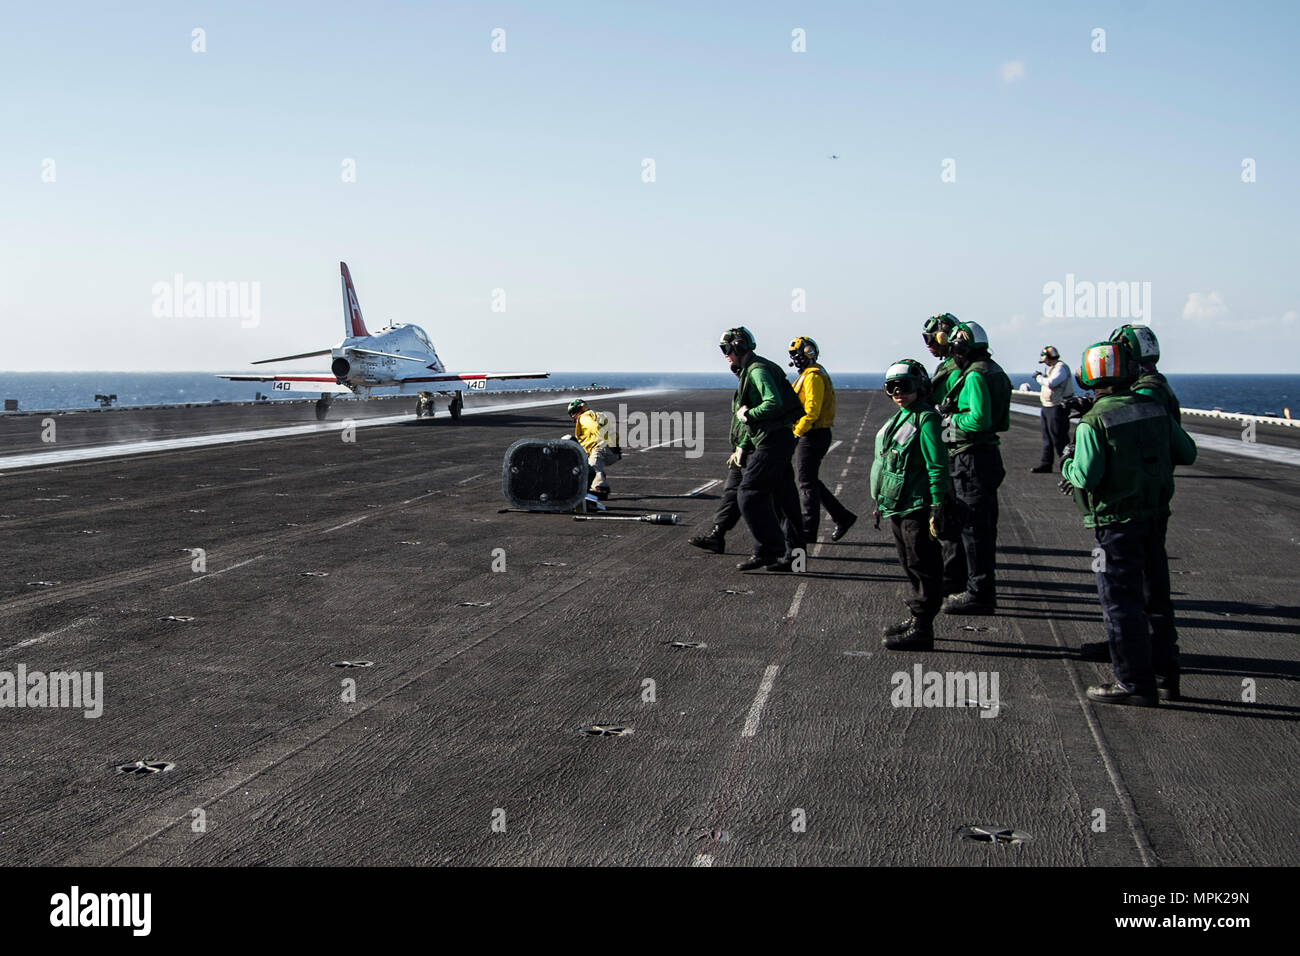 170209-N-OS569-738    ATLANTIC OCEAN (Feb. 9, 2017) Capt. Paul C. Spedero Jr., commanding officer of the aircraft carrier USS Dwight D. Eisenhower (CVN 69) (Ike), pilots a T-45C Goshawk assigned to Carrier Training Wing (CTW) 1 as it launches from the flight deck. Ike is currently conducting aircraft carrier qualifications during the sustainment phase of the Optimized Fleet Response Plan (OFRP). (U.S. Navy photo by Mass Communication Specialist Seaman Apprentice Zach Sleeper) Stock Photo